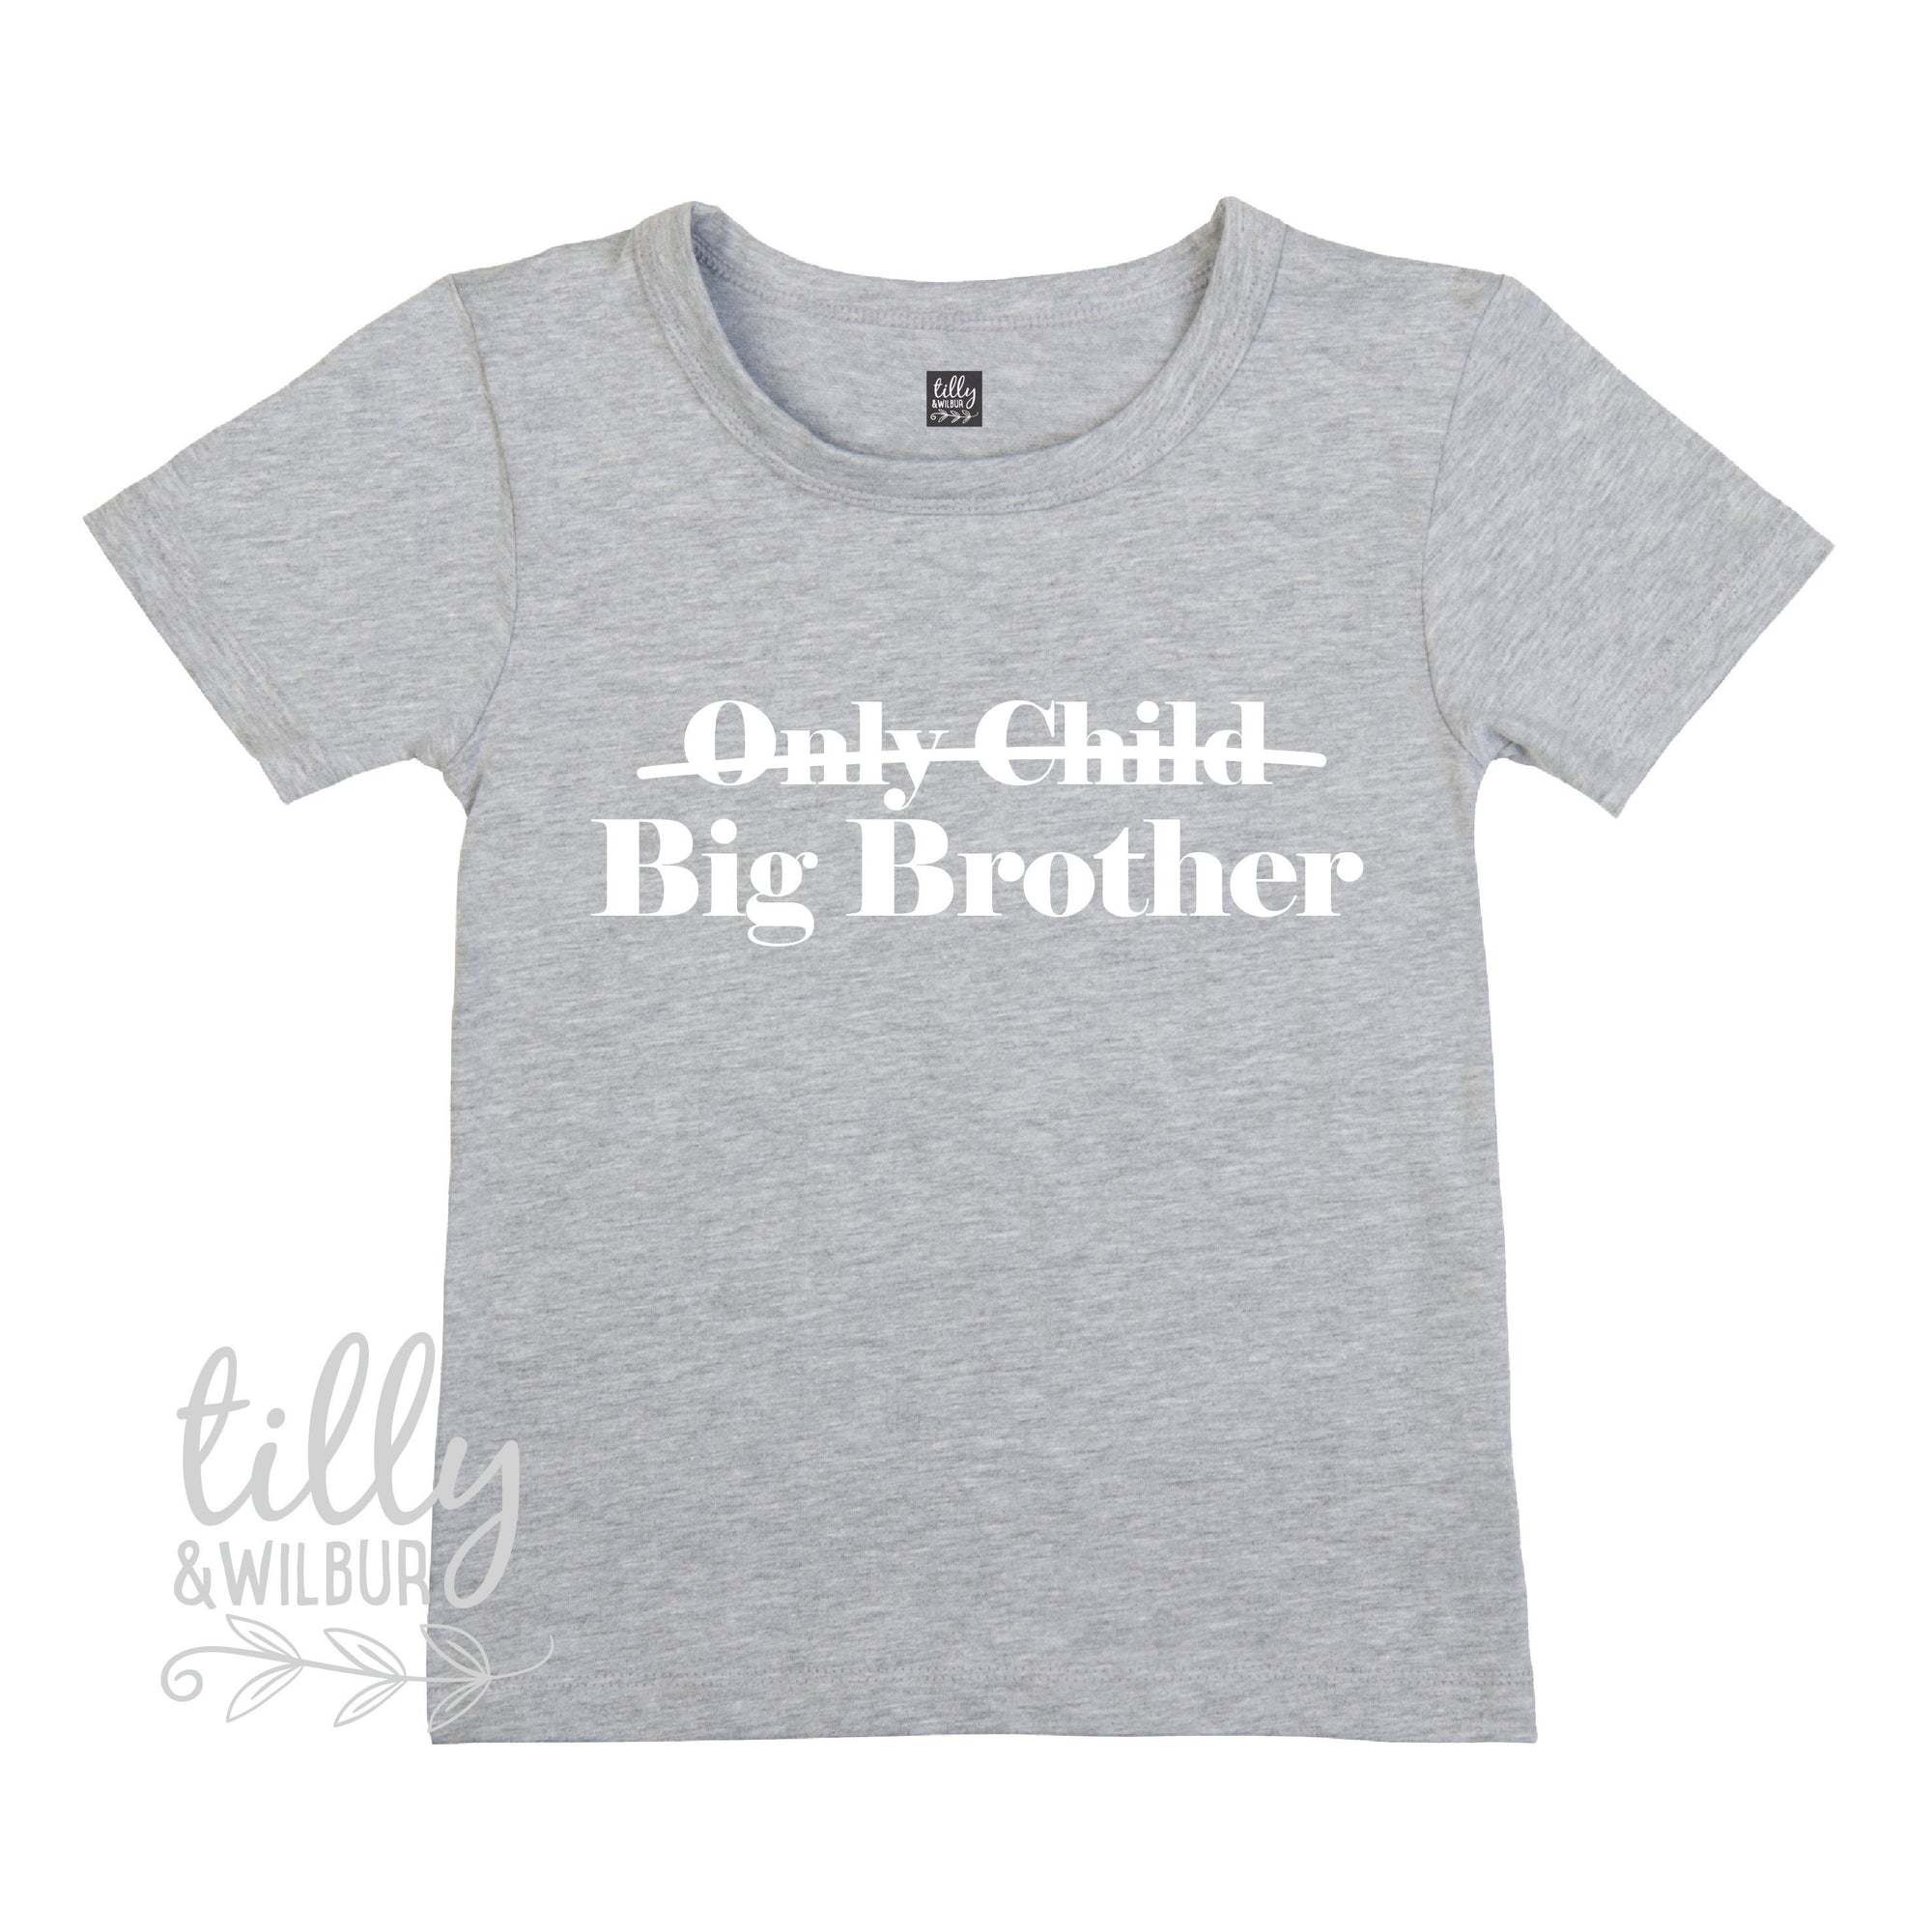 Only Child Big Brother T-Shirt For Boys, Future Big Brother T-Shirt For Boys, Big Brother Announcement Gift, Pregnancy Announcement Shirt